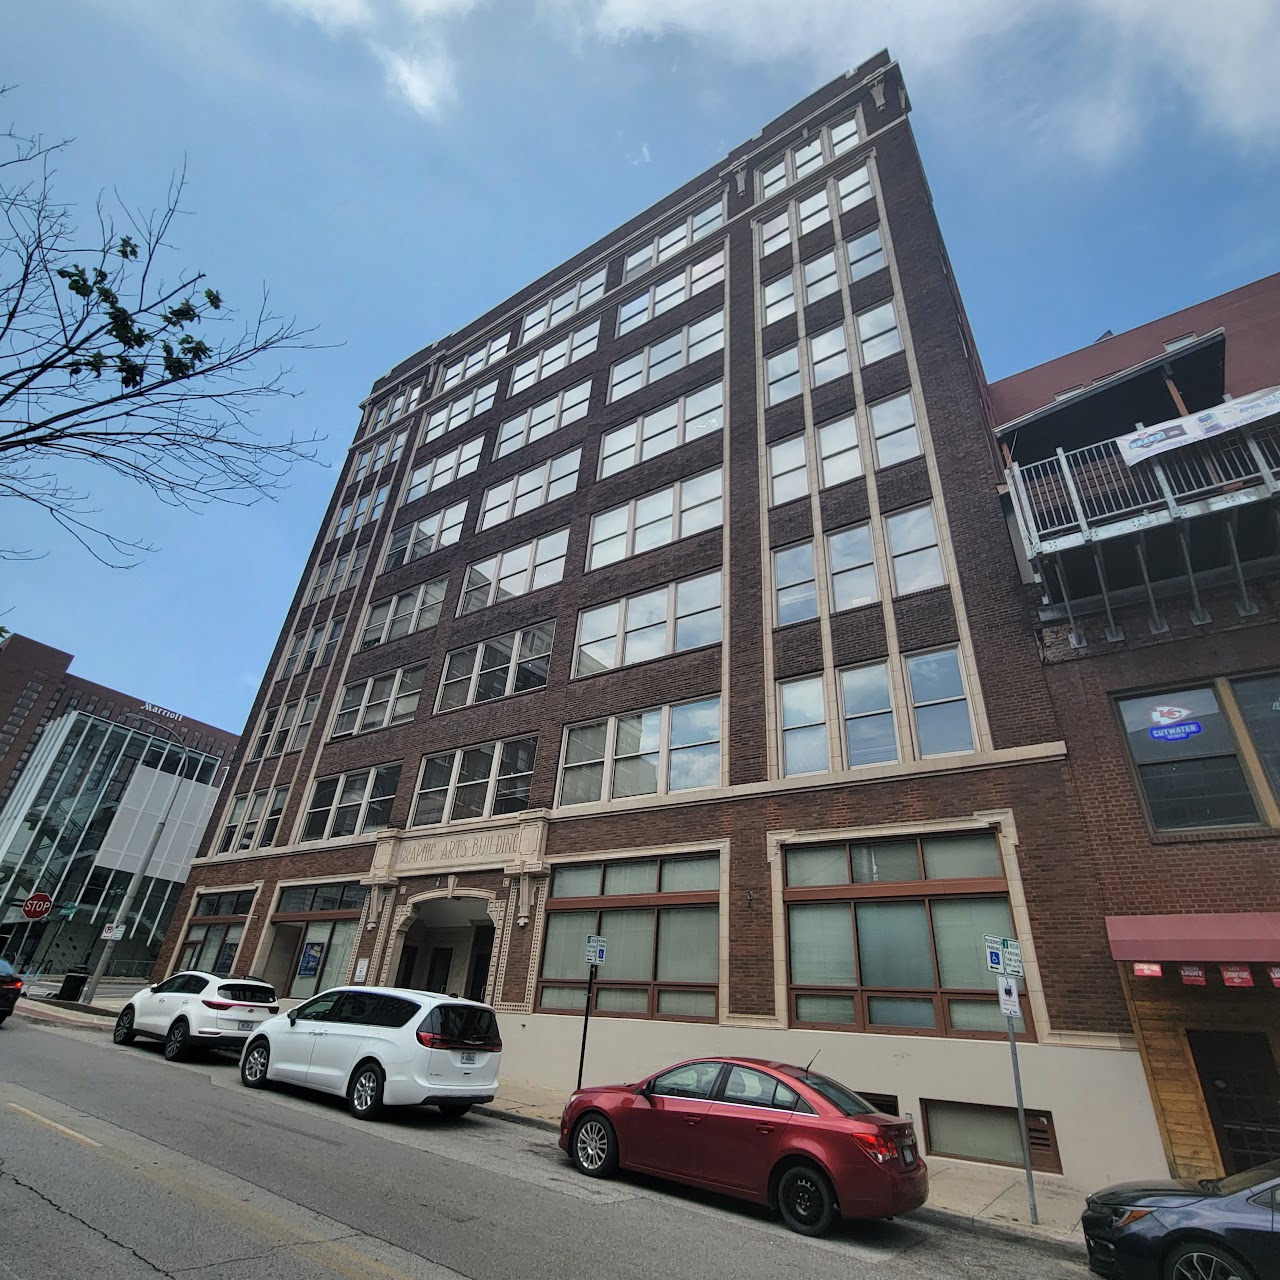 Photo of GRAPHIC ART LOFTS. Affordable housing located at 934 WYANDOTTE ST KANSAS CITY, MO 64105